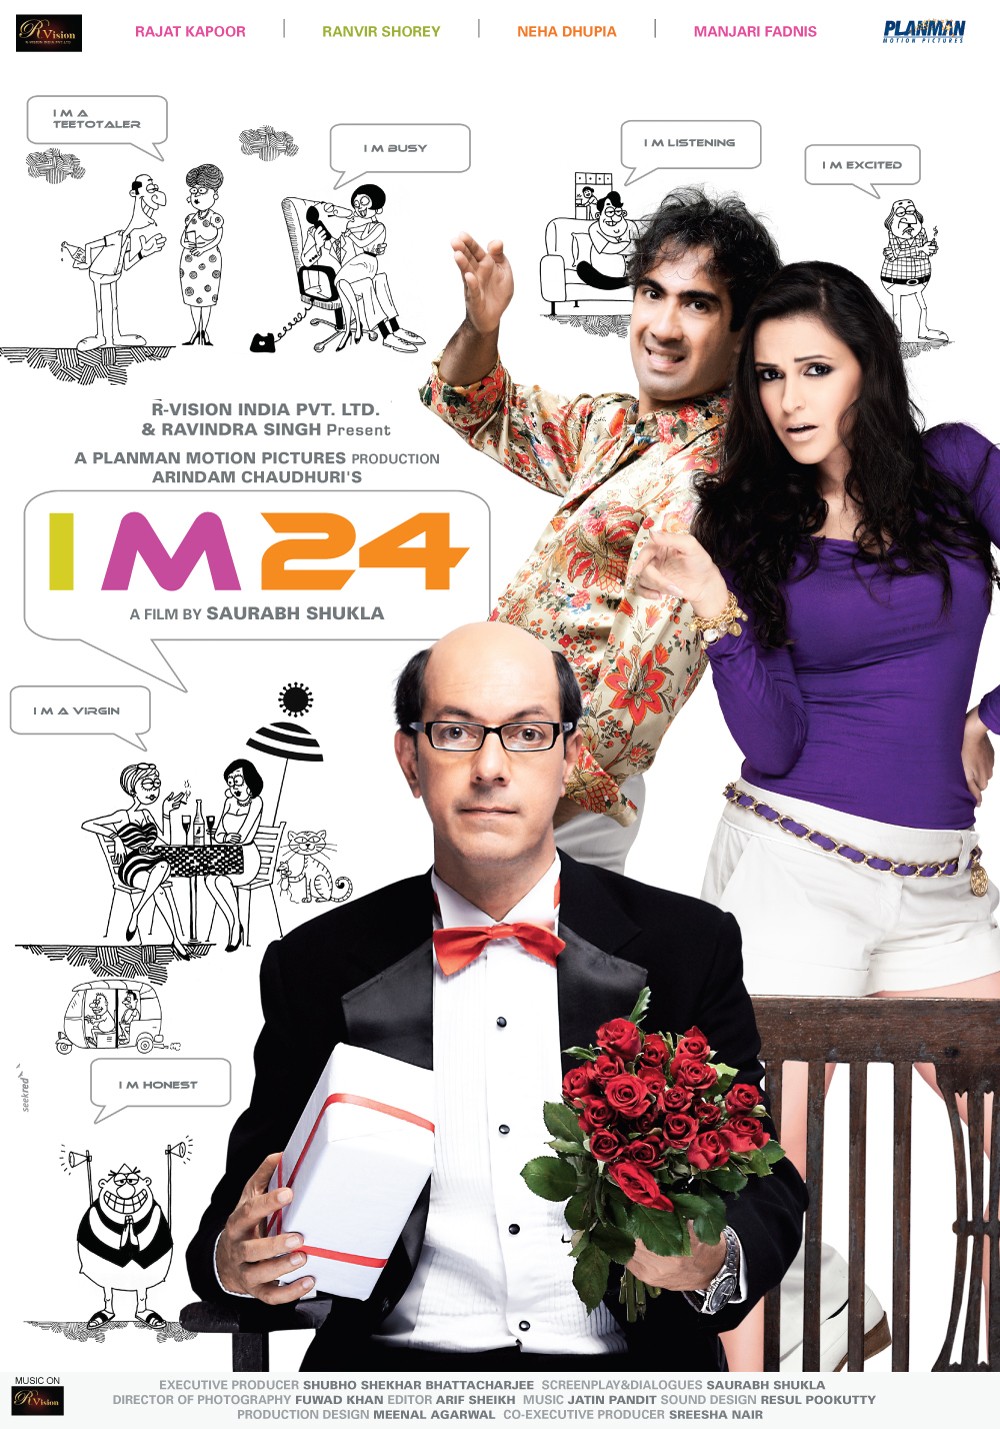 Extra Large Movie Poster Image for I m 24 (#4 of 7)